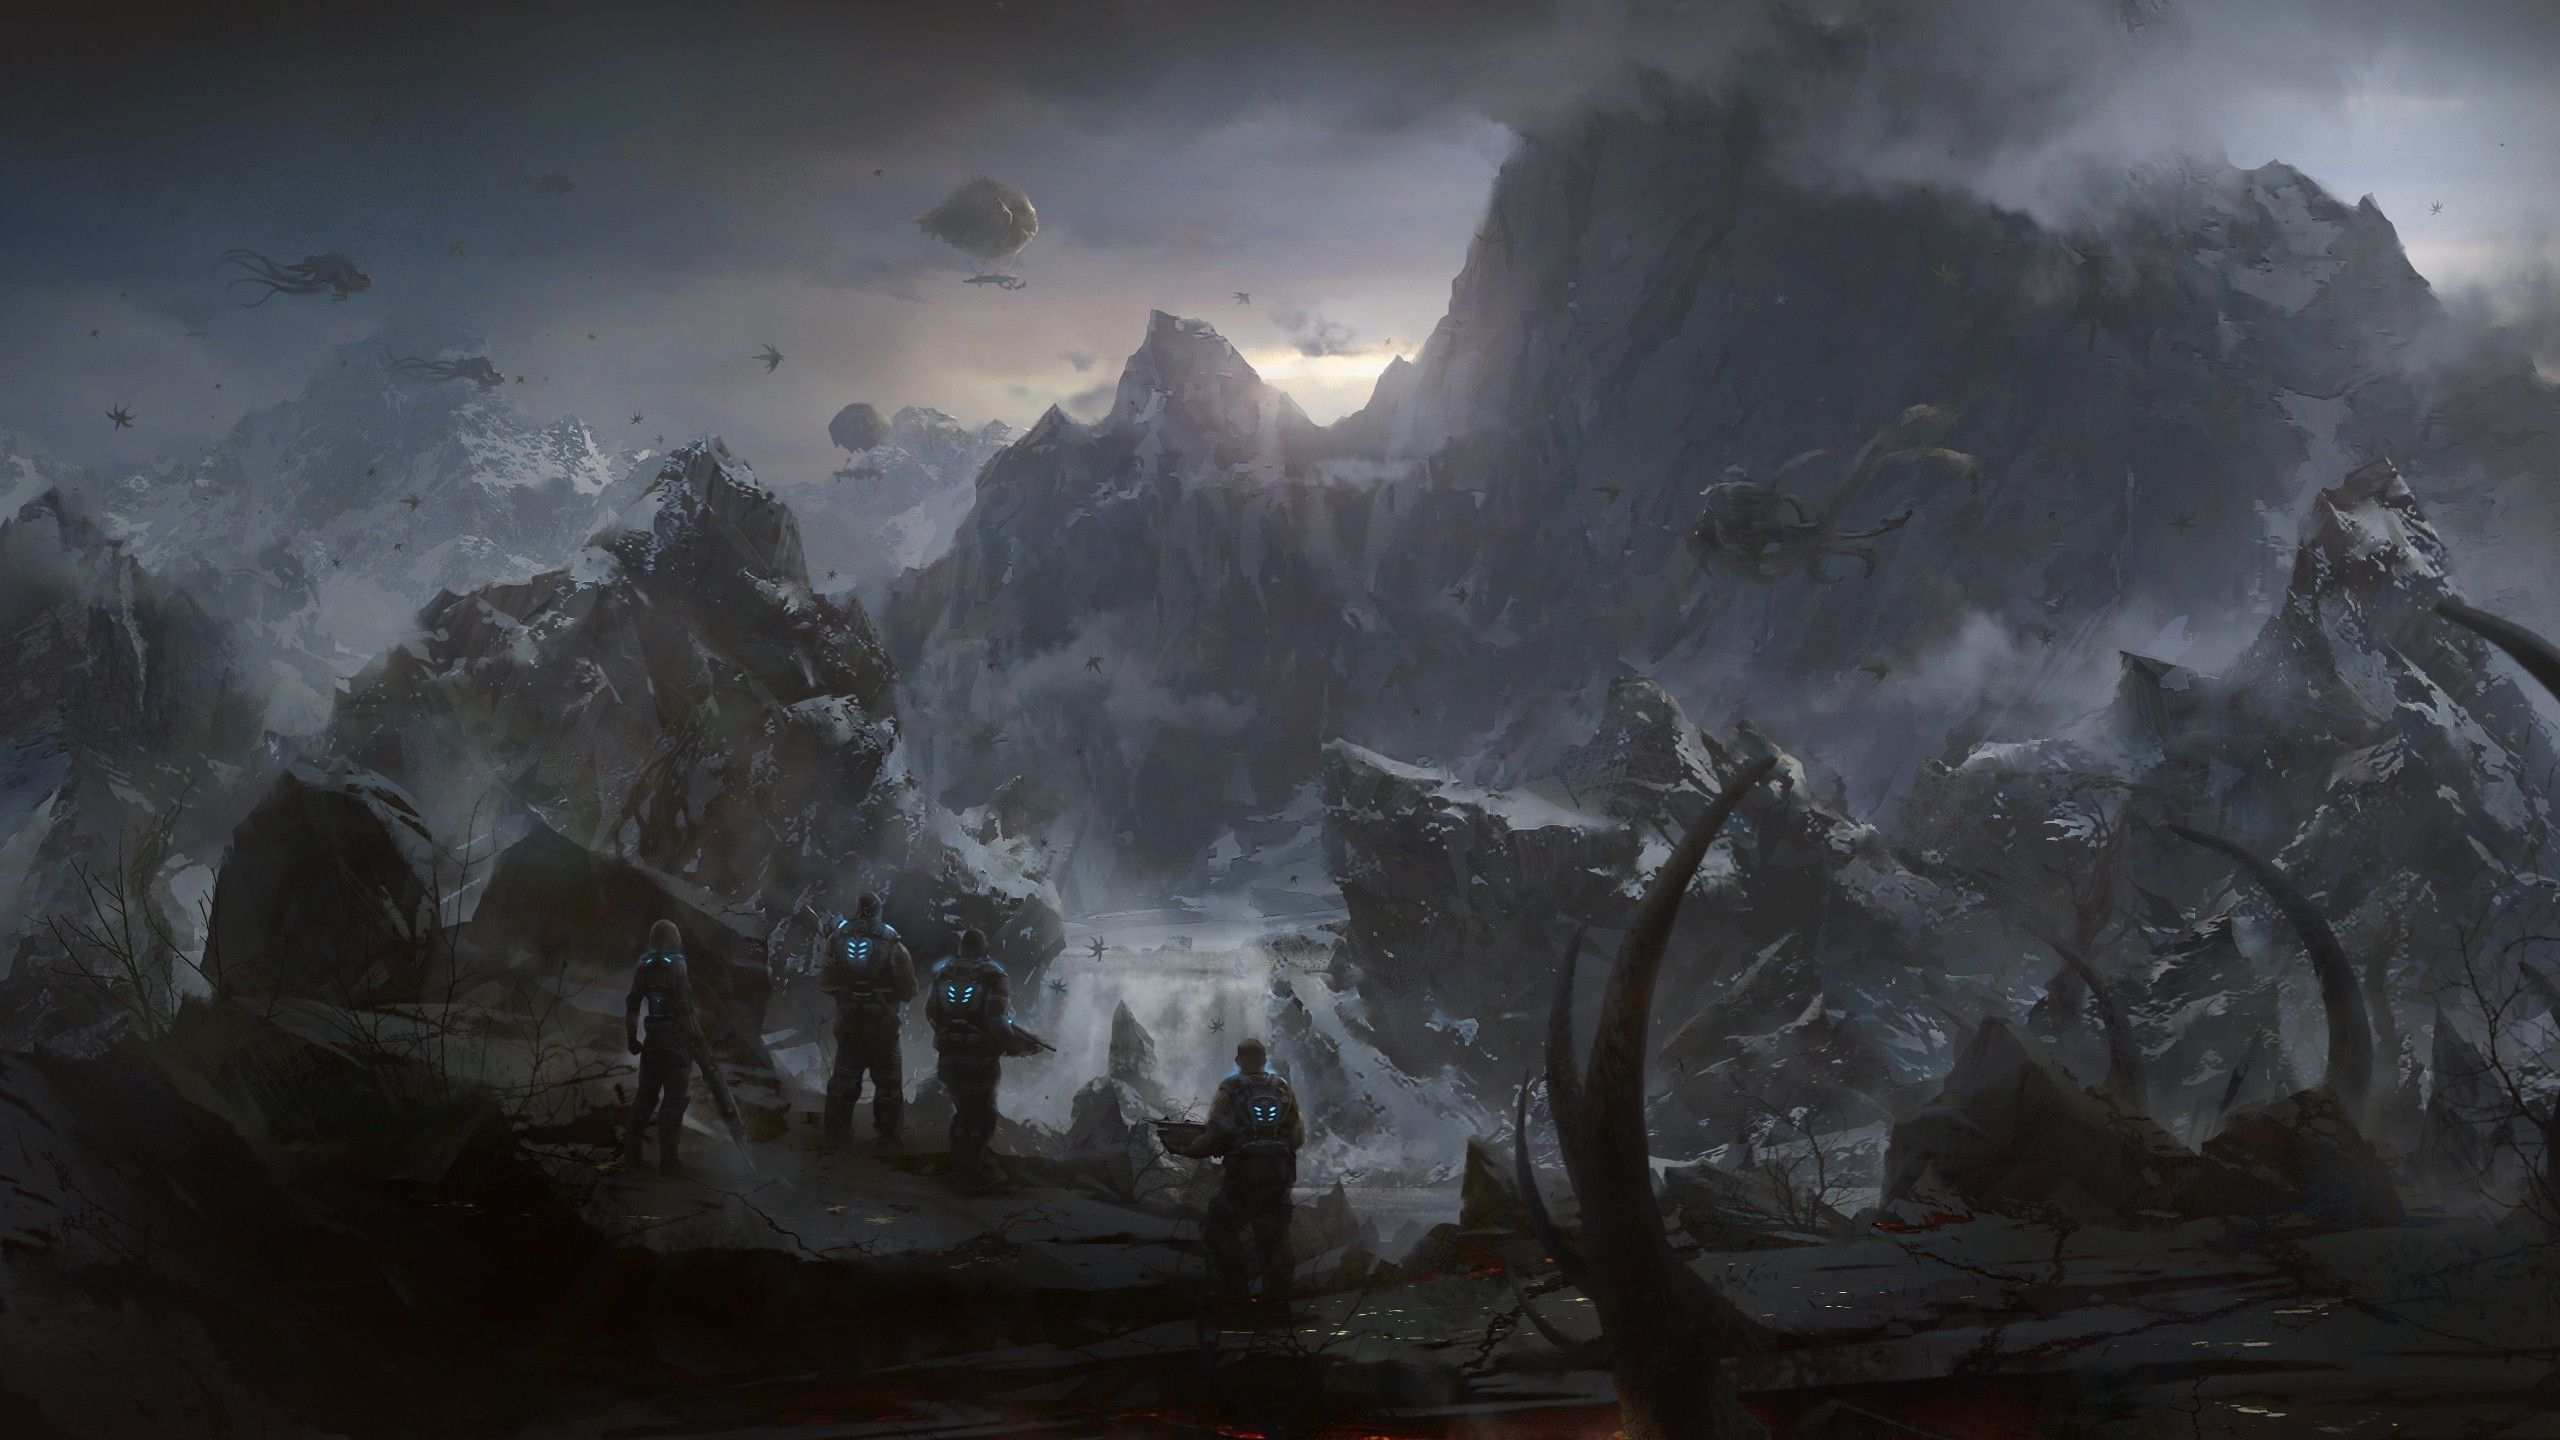 Download Wallpaper 2560x1440 Gears of war, Mountains, Soldiers ...